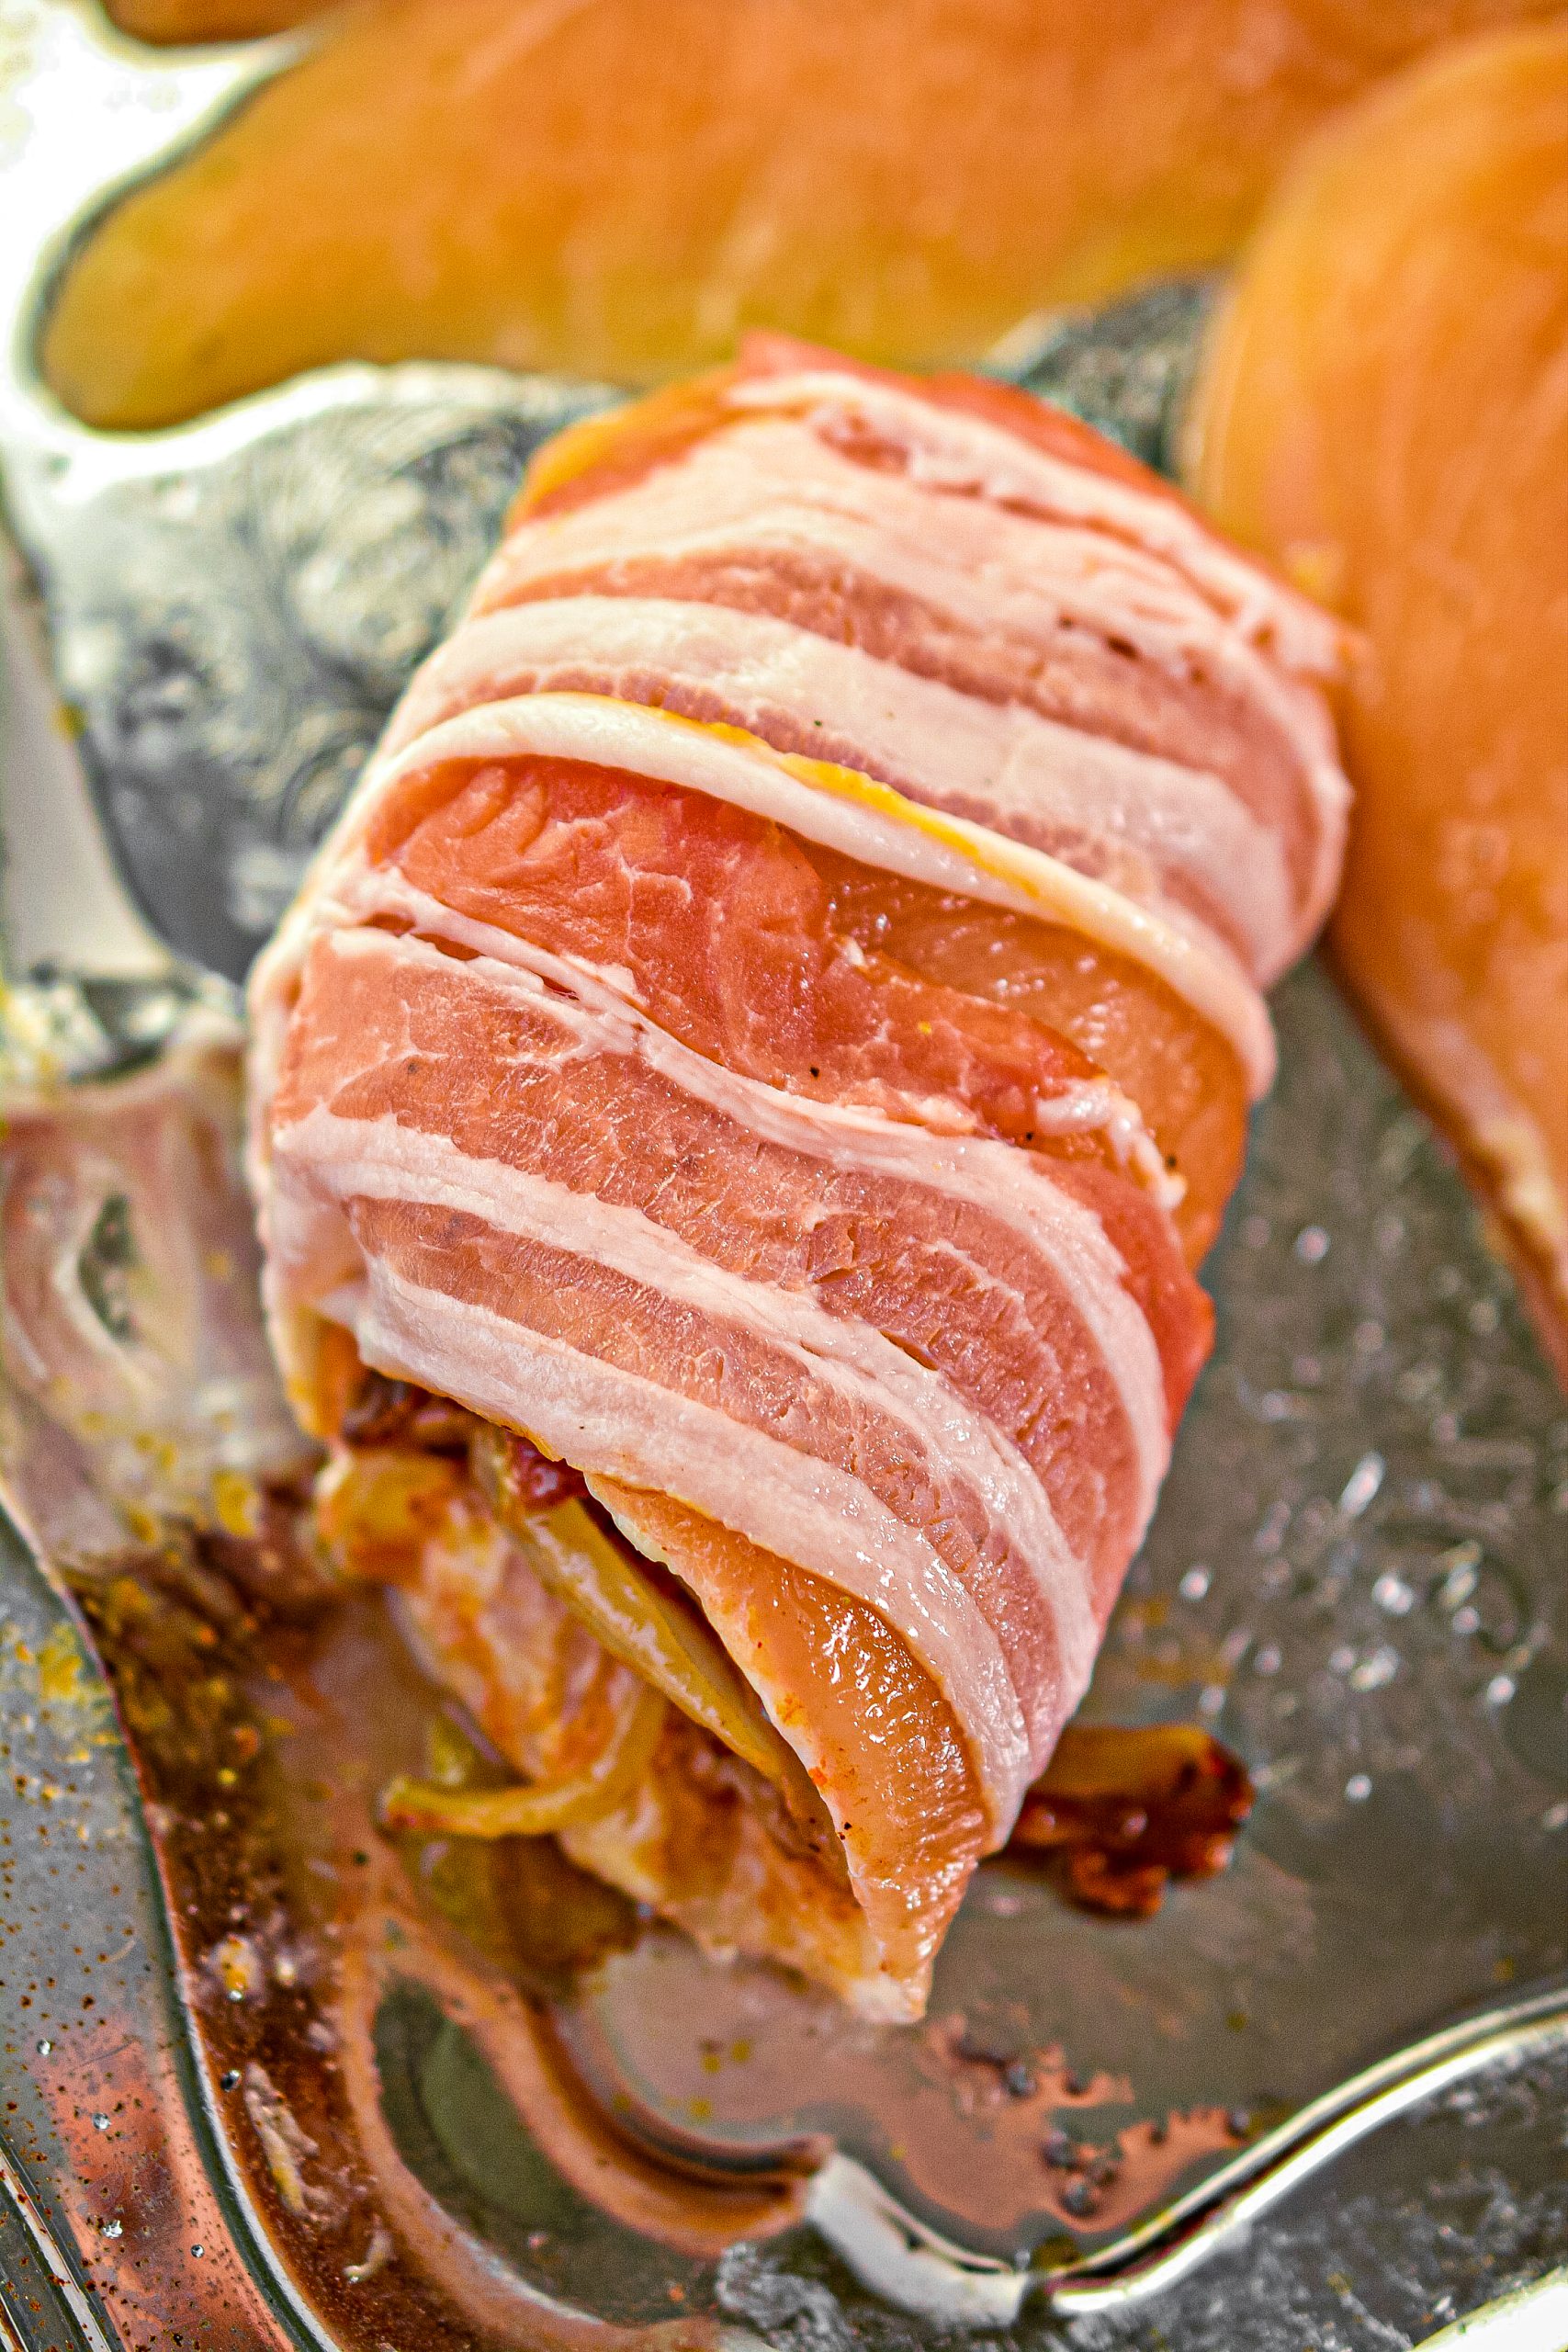 Wrap an uncooked piece of bacon around the outside of the rolled chicken breast, and place it on a baking sheet.